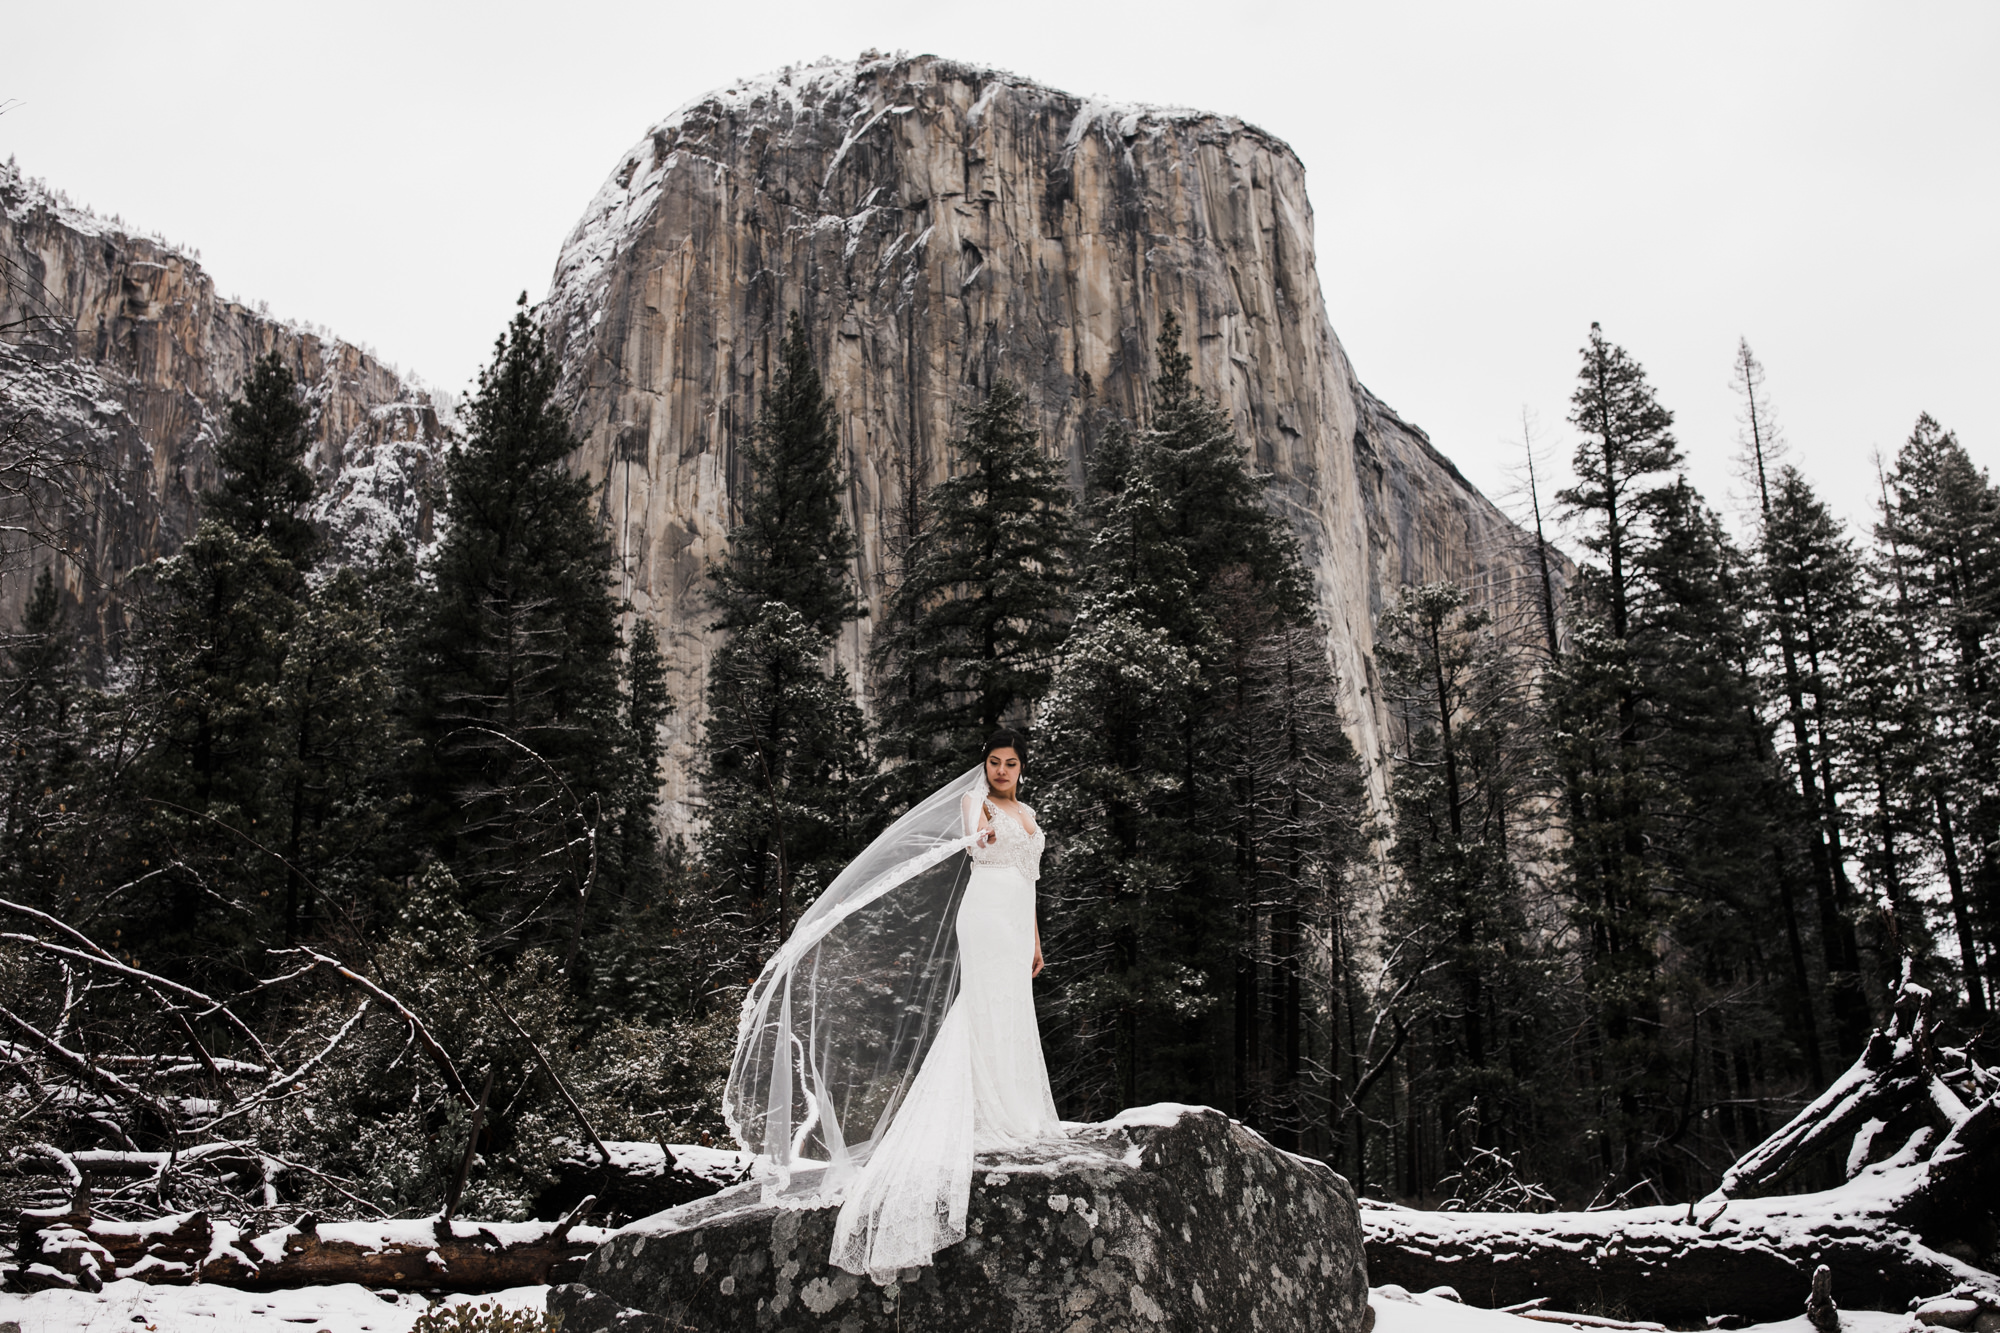 eloping in yosemite national park in the winter